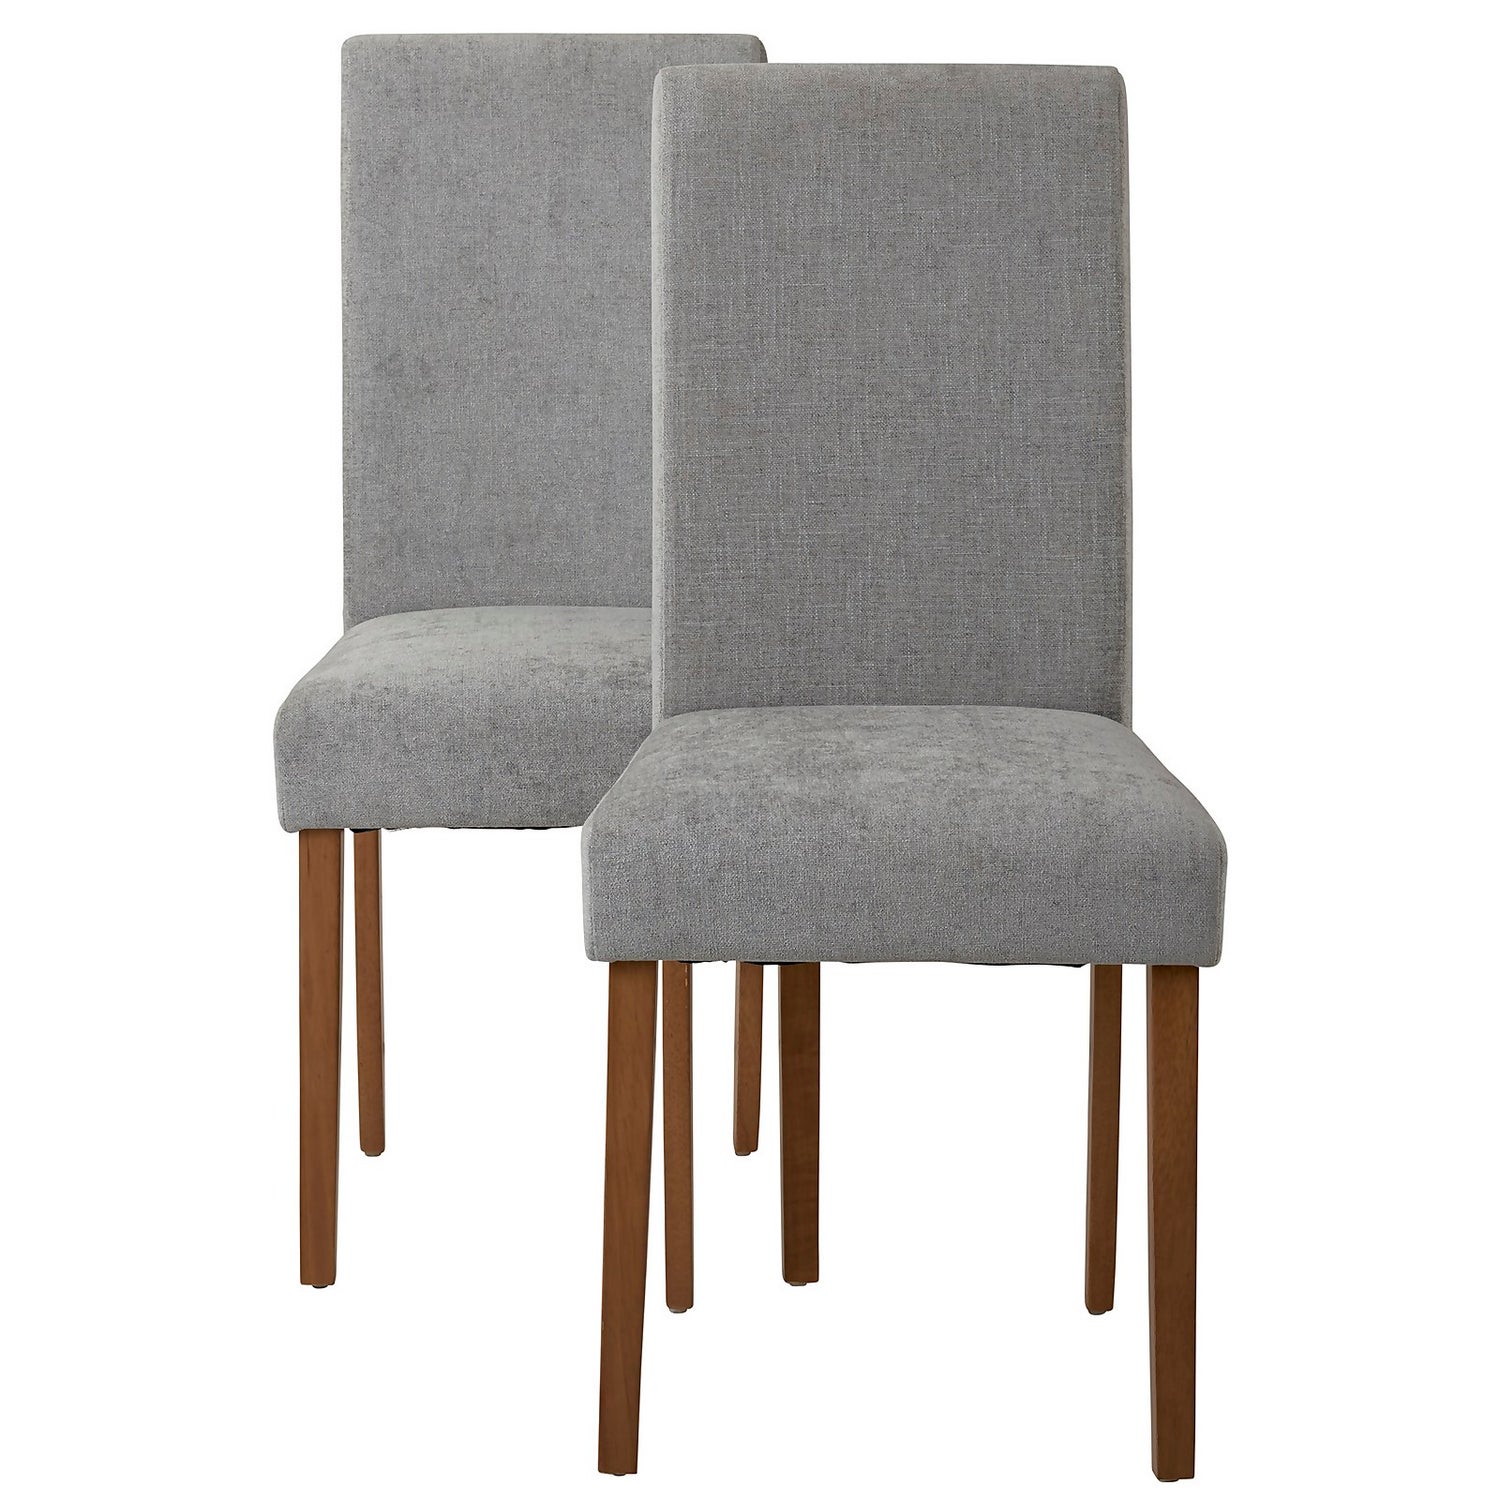 Dining Chairs Diva Dining Chairs - Set of 2 - Grey | Homebase